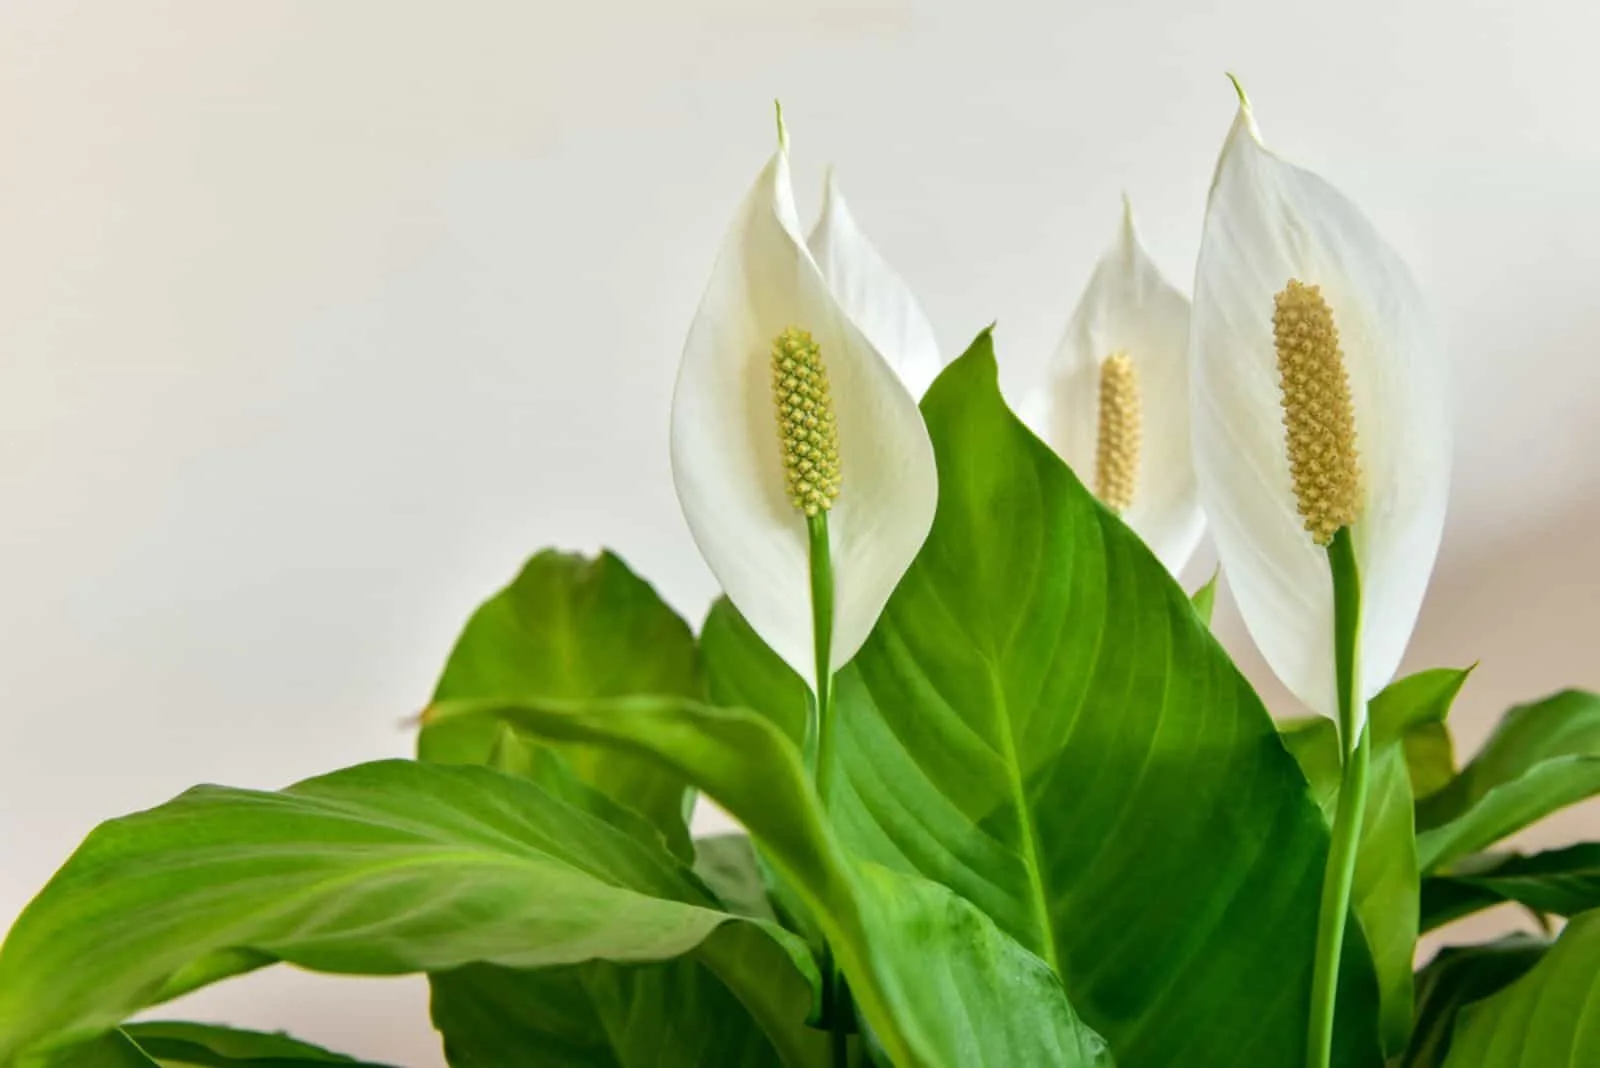 Decorative houseplant Spathiphyllum wallisii. Commonly known as peace lily